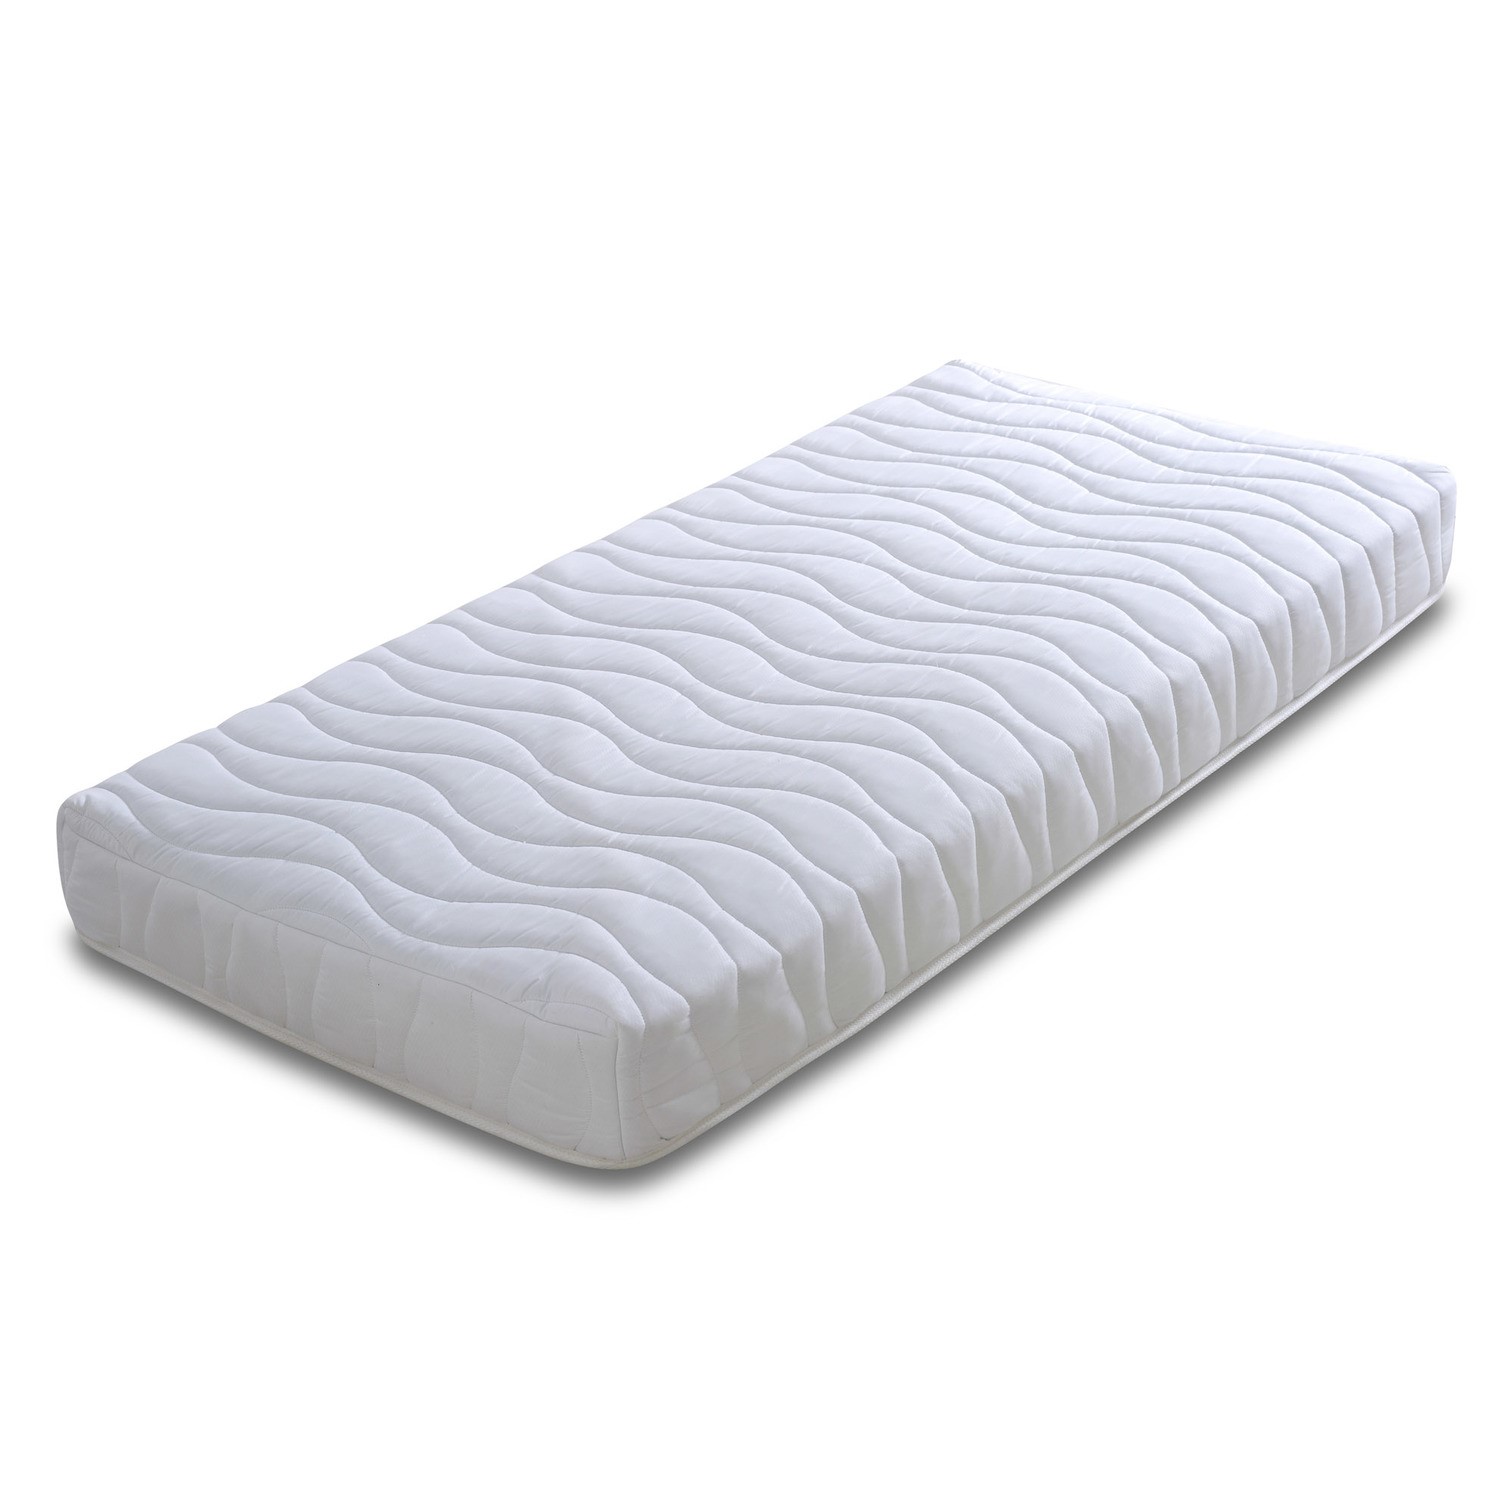 Read more about European single pocket sprung rolled hypoallergenic mattress little champ visco therapy